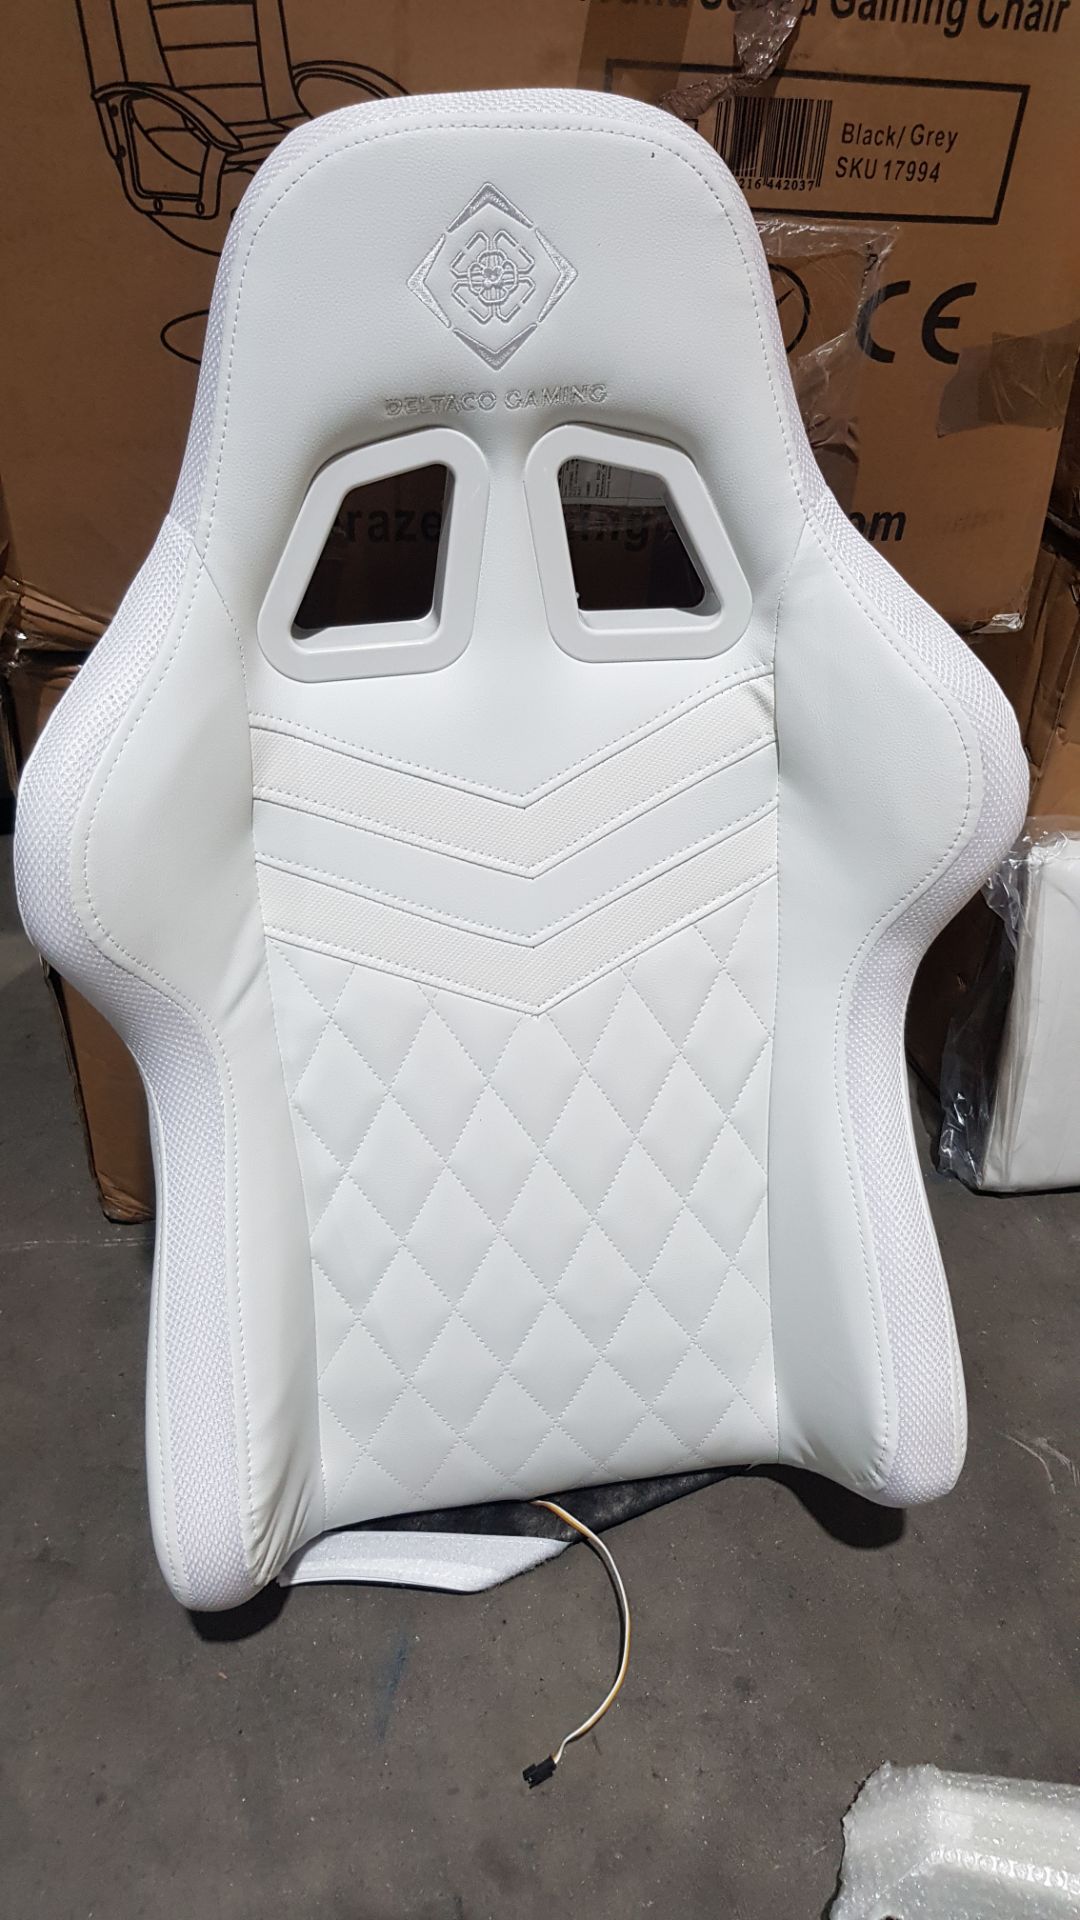 Title: (8/P) RRP £259Deltaco RGB Ergonomic Gaming Chair White332 Colour ModesWipe Clean - Image 9 of 14